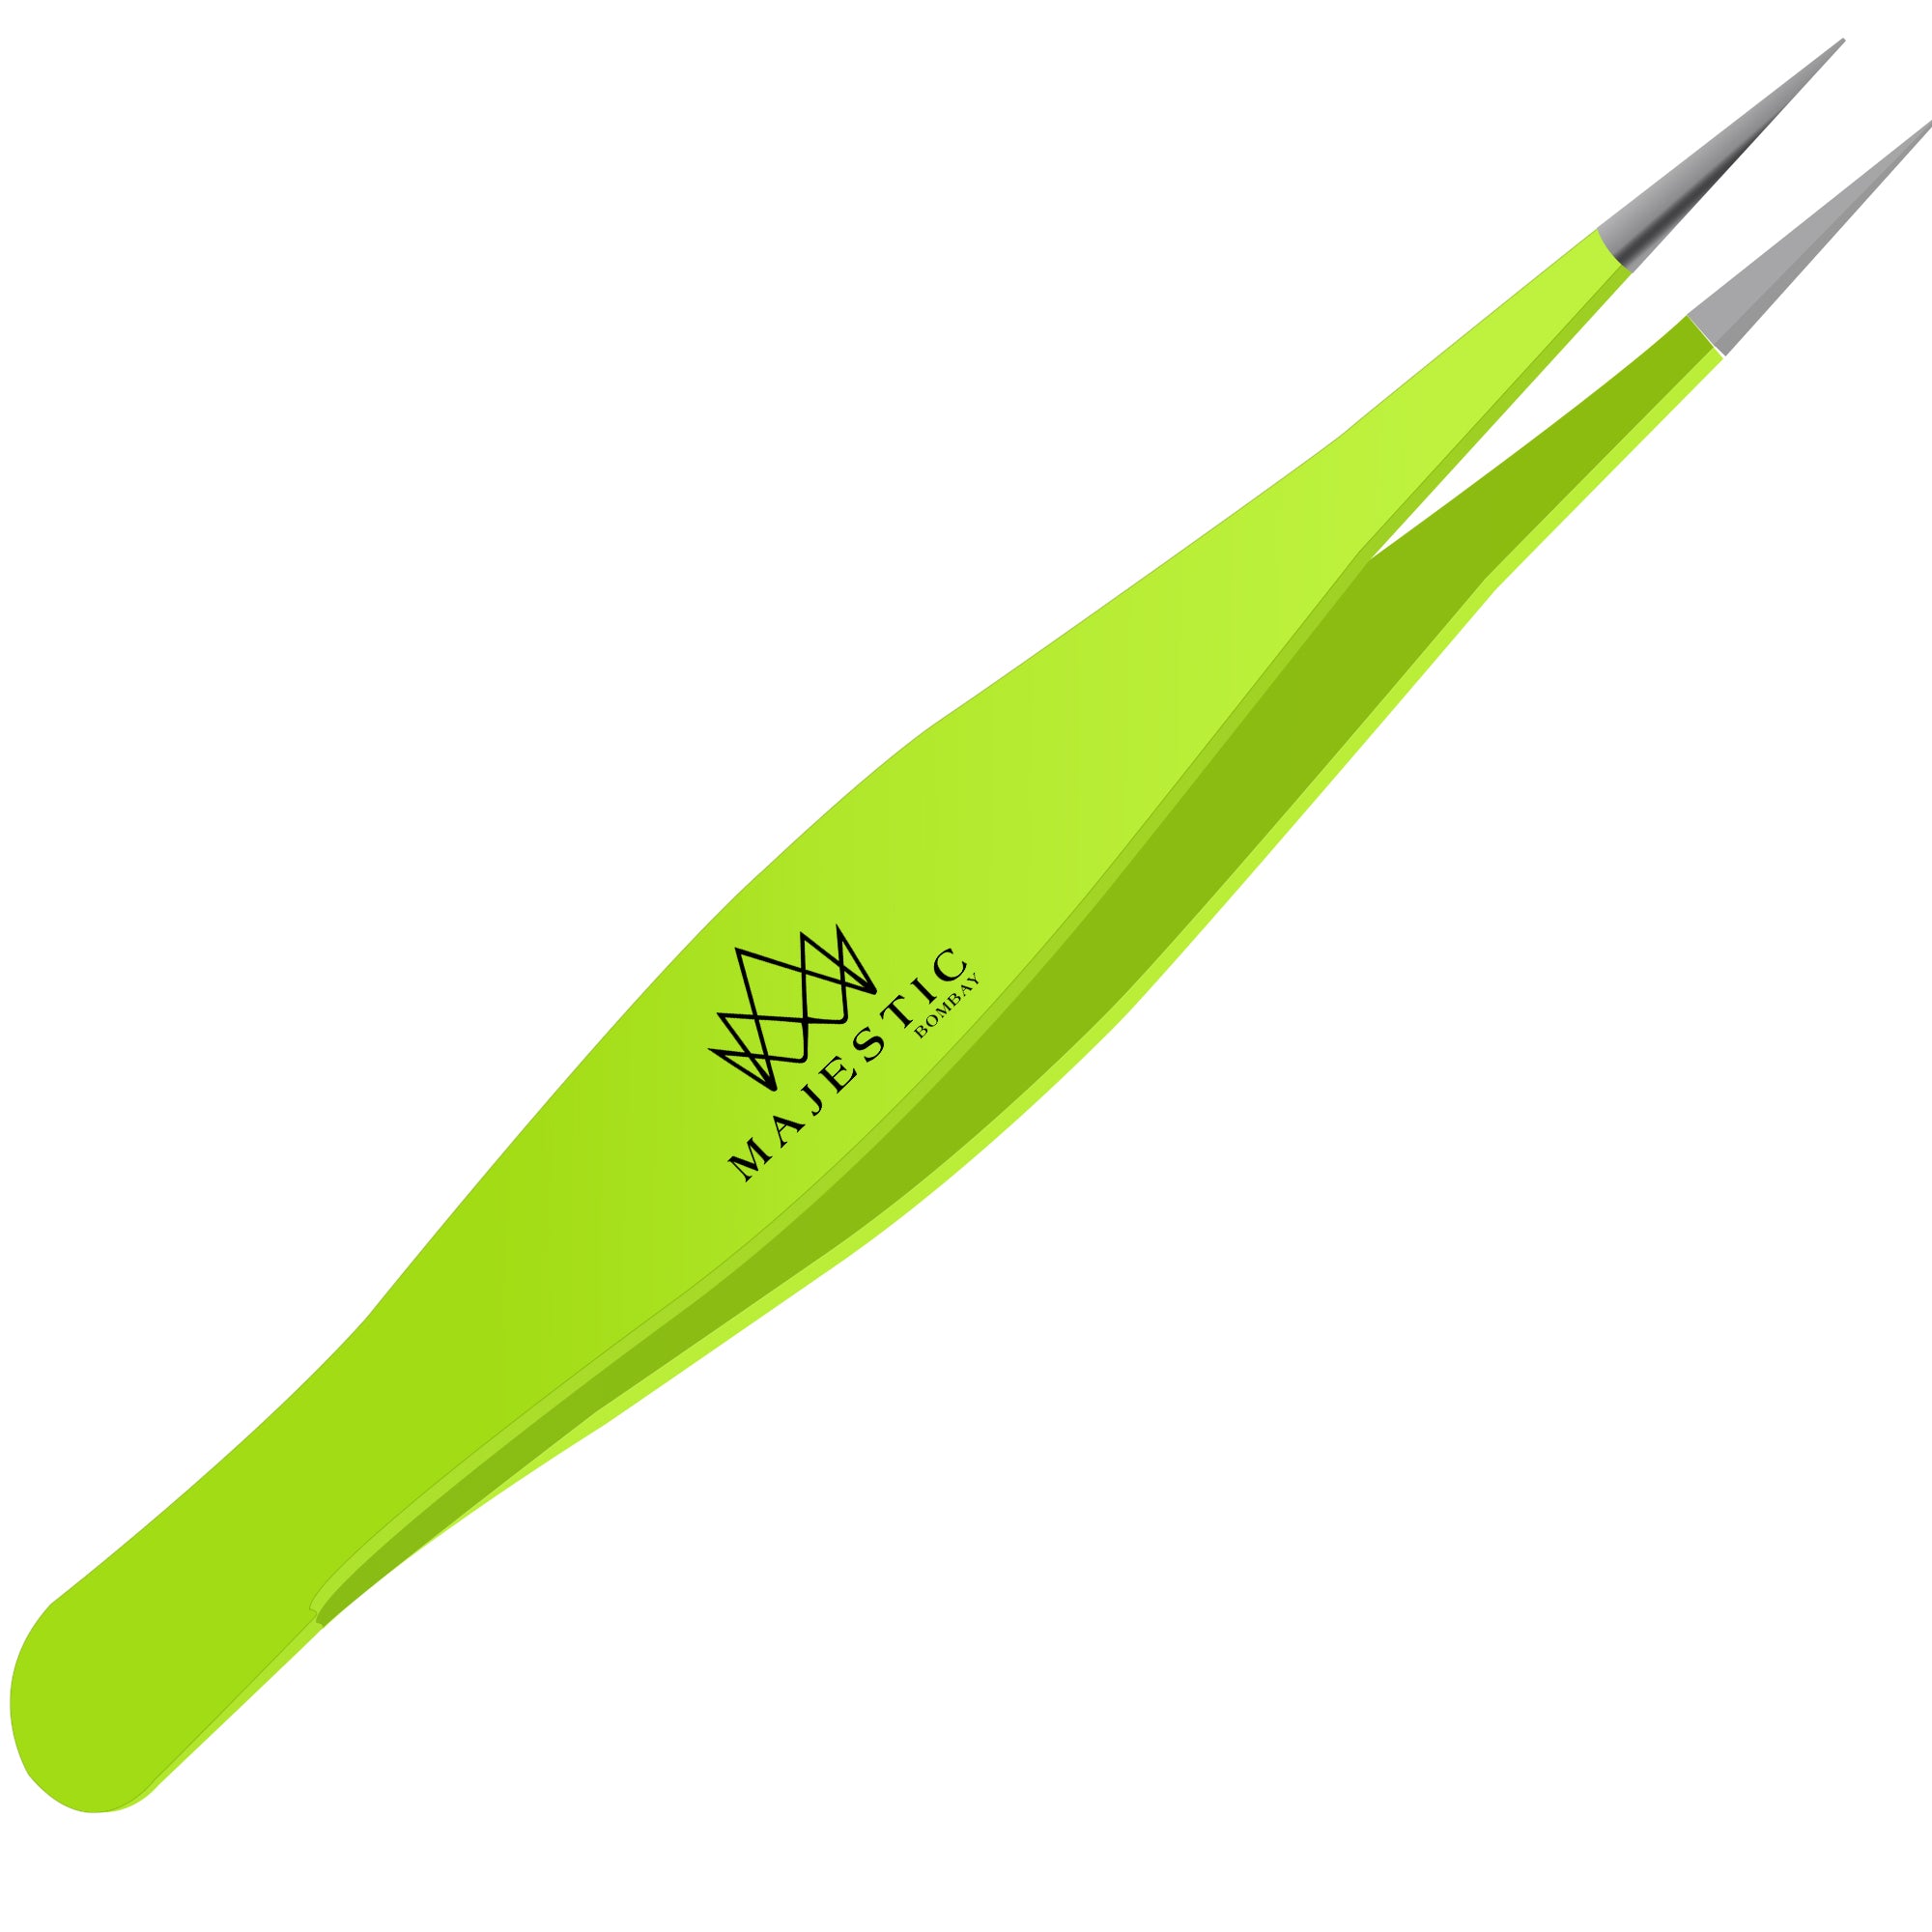 Majestic Bombay Precision Sharp Needle Nose Pointed Surgical Tweezers for  Ingrown Hair, Black